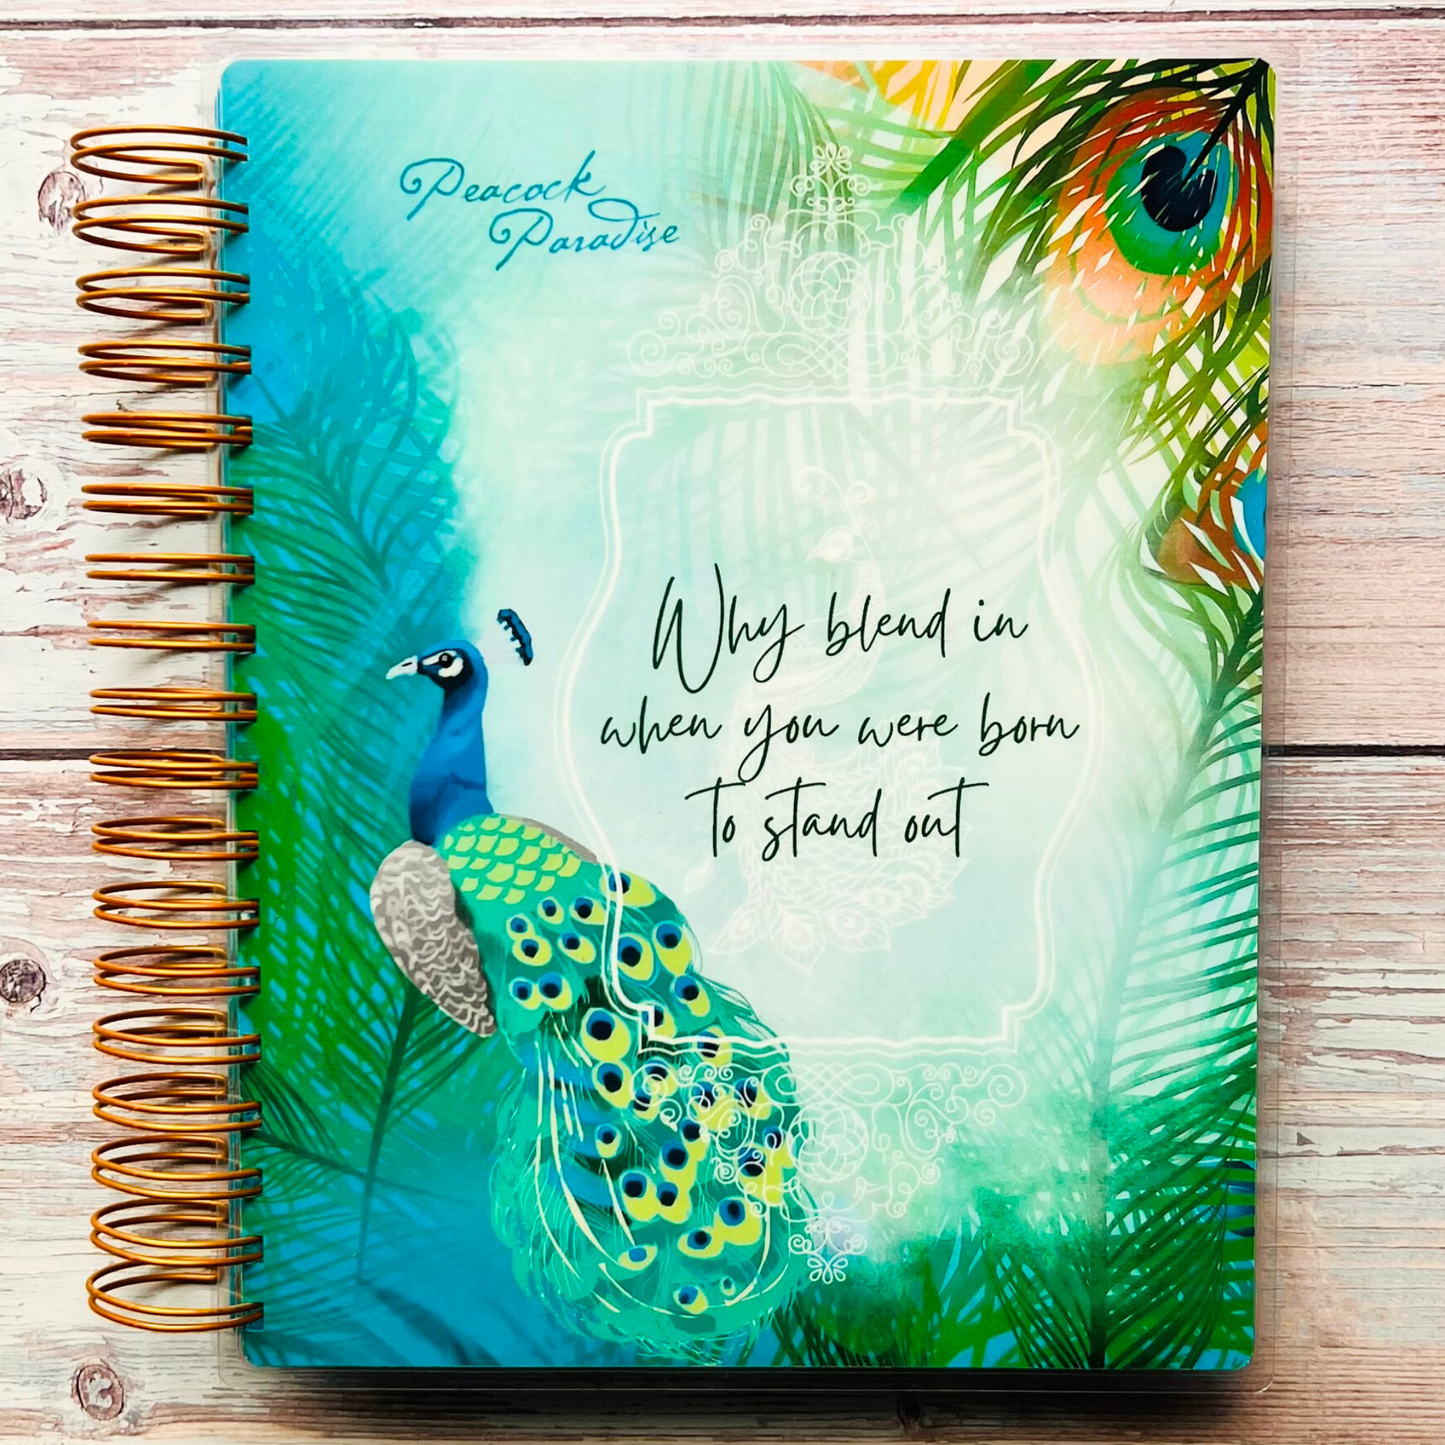 Personalized Peacock Paradise Planner